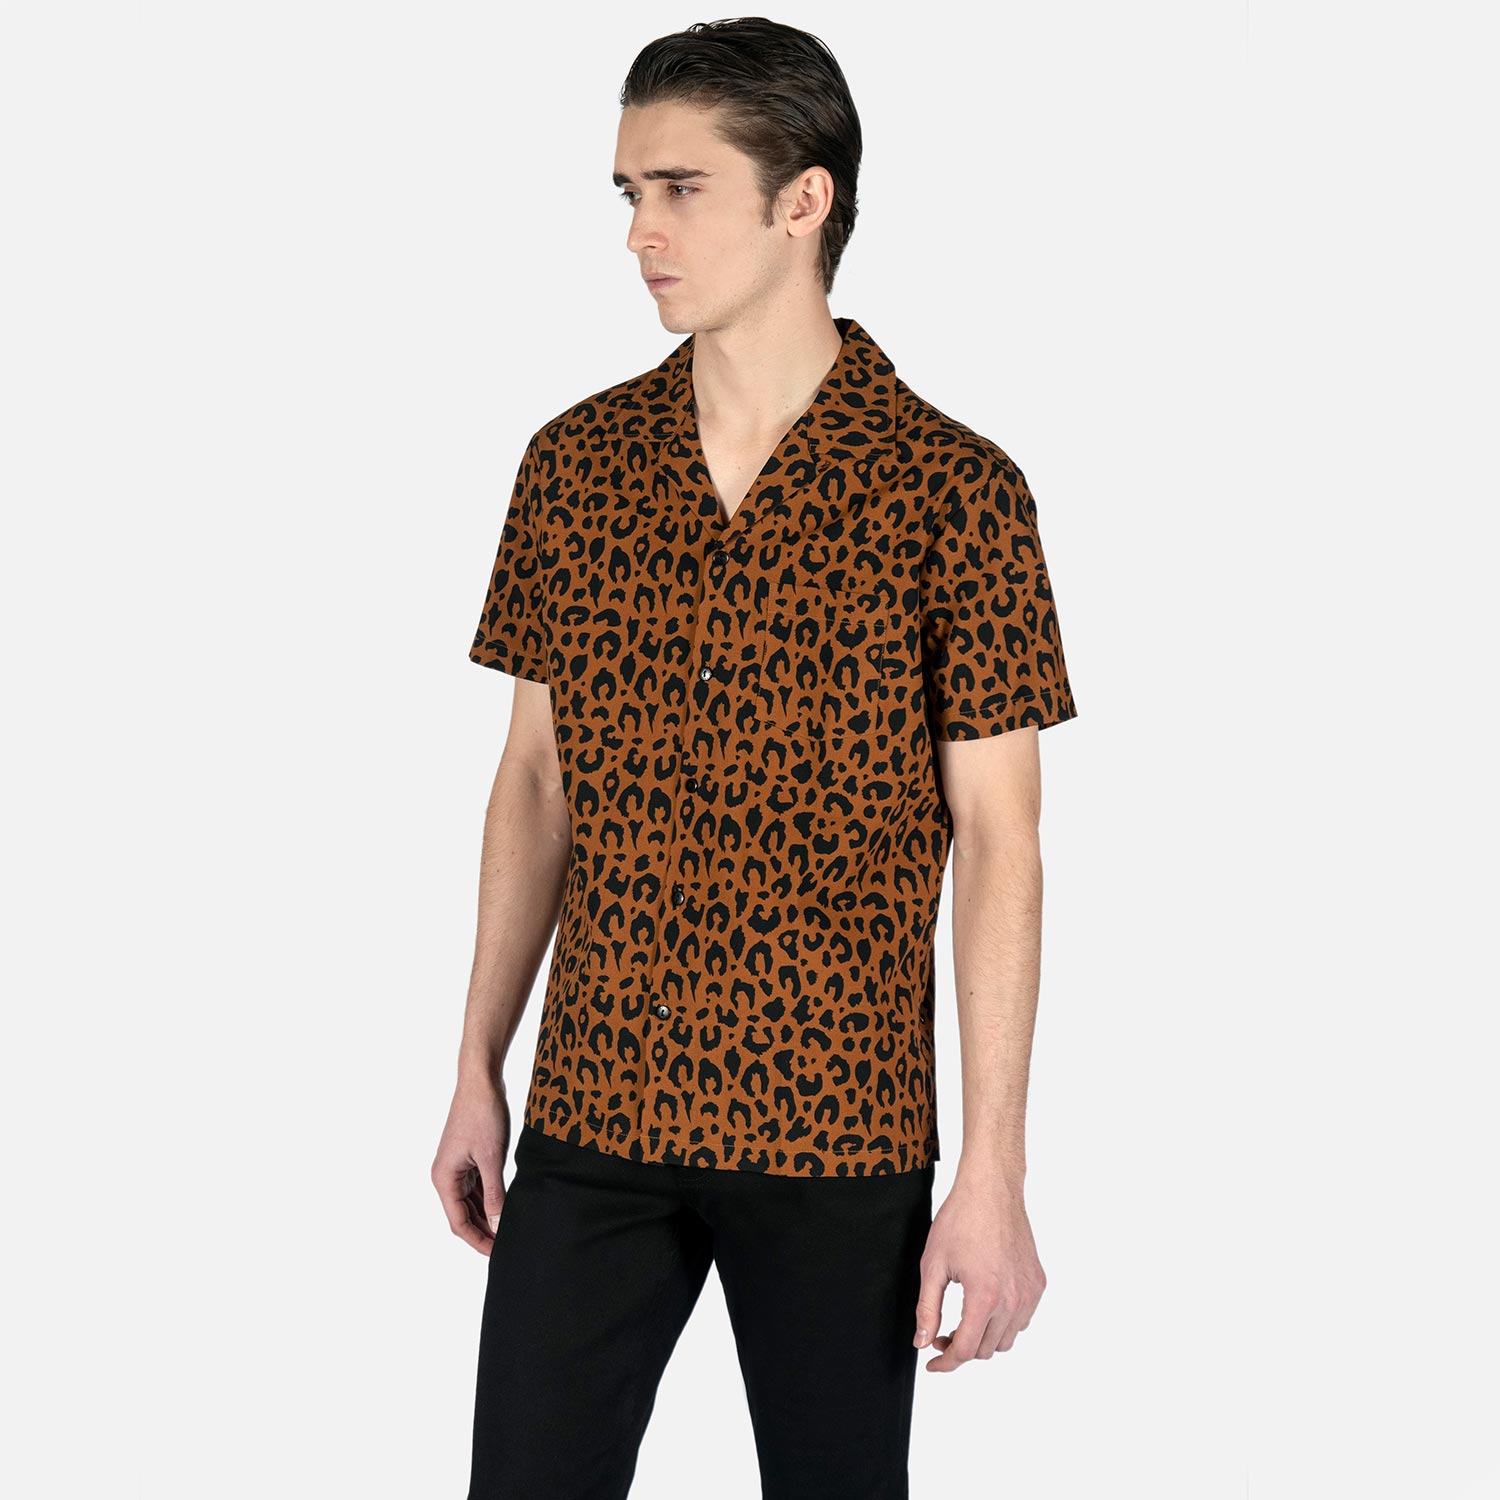 Boss Leopard - Brown and Black Leopard Print Shirt | Straight To Hell ...